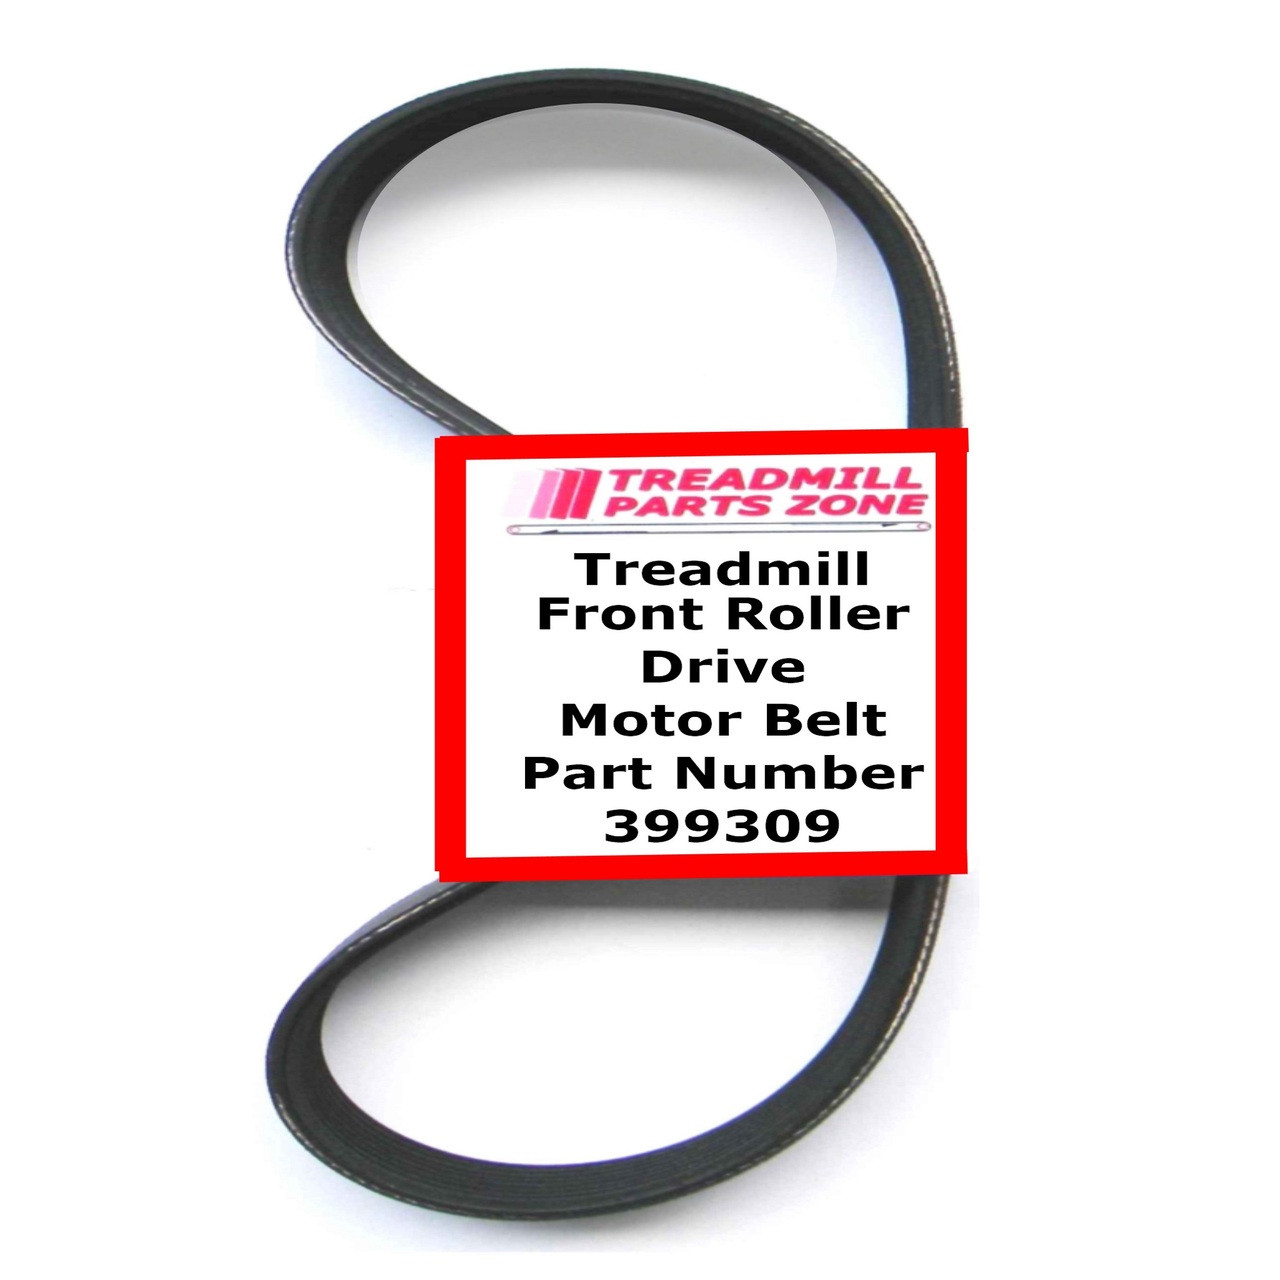 Sears Treadmill Model 24860.9 Drive Pulley Belt Part Number 399309